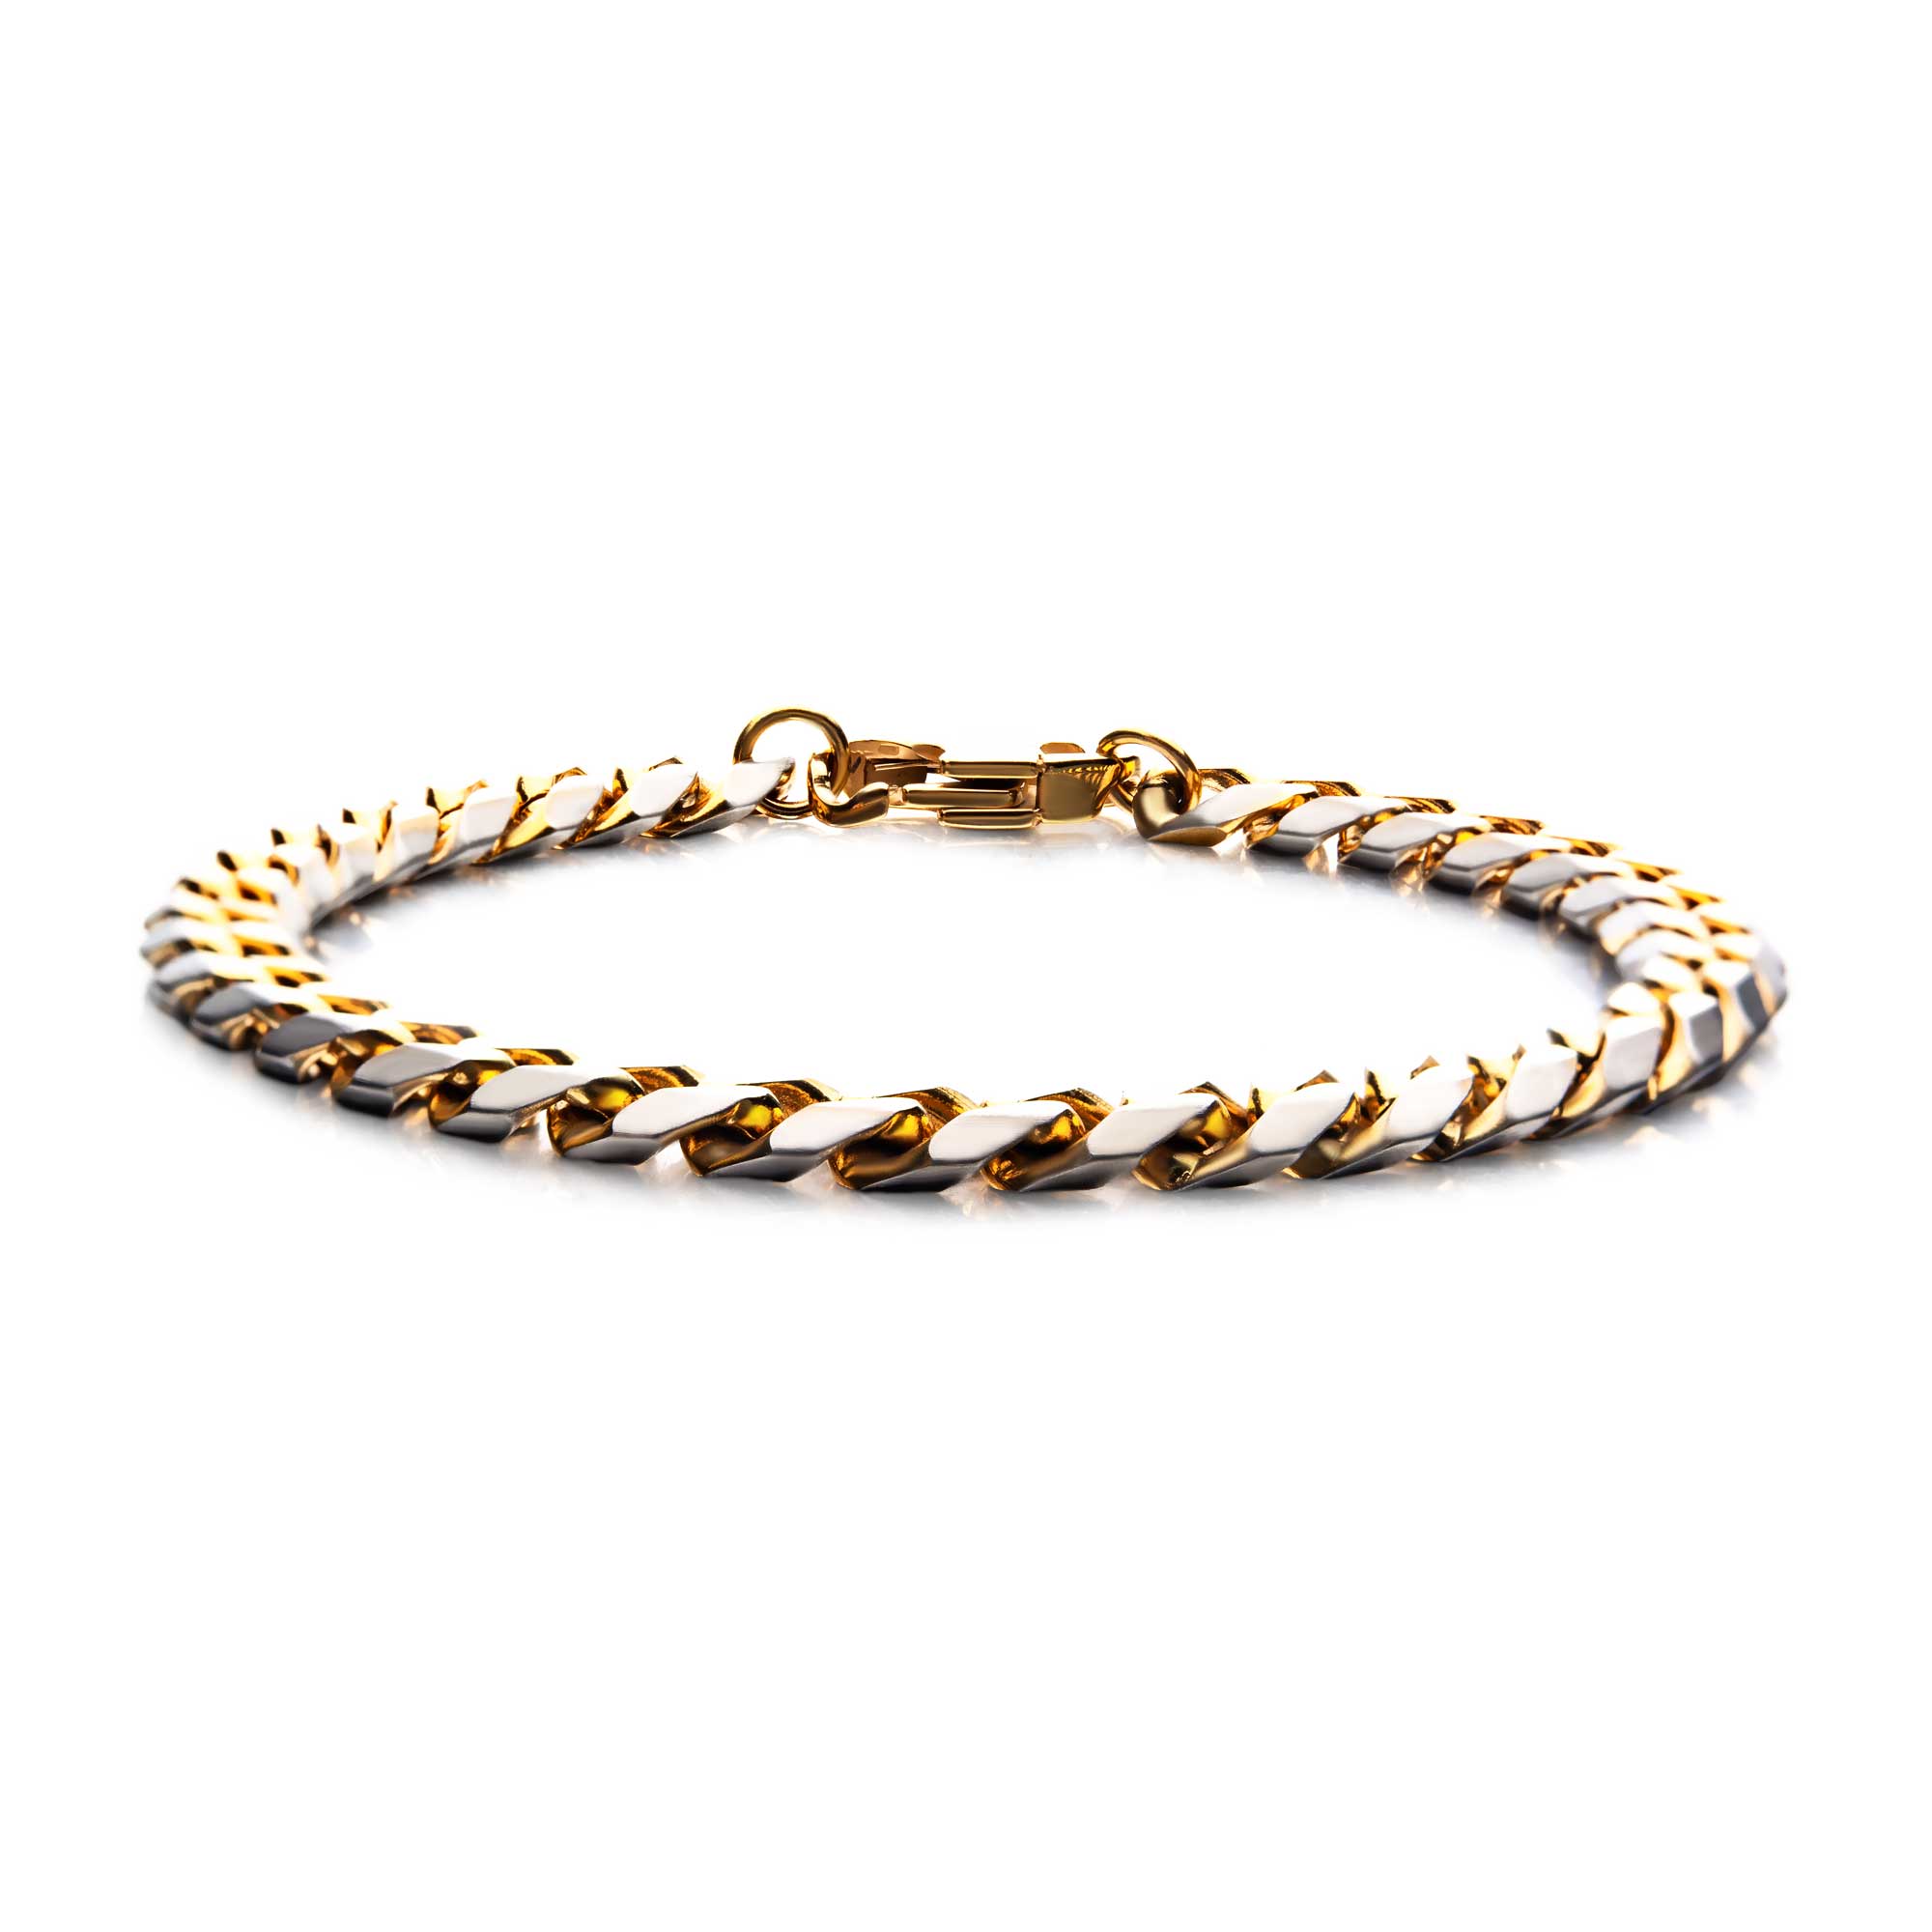 Stainless Steel Gold Plated 8mm Curb Chain with Lobster Clasp Ken Walker Jewelers Gig Harbor, WA